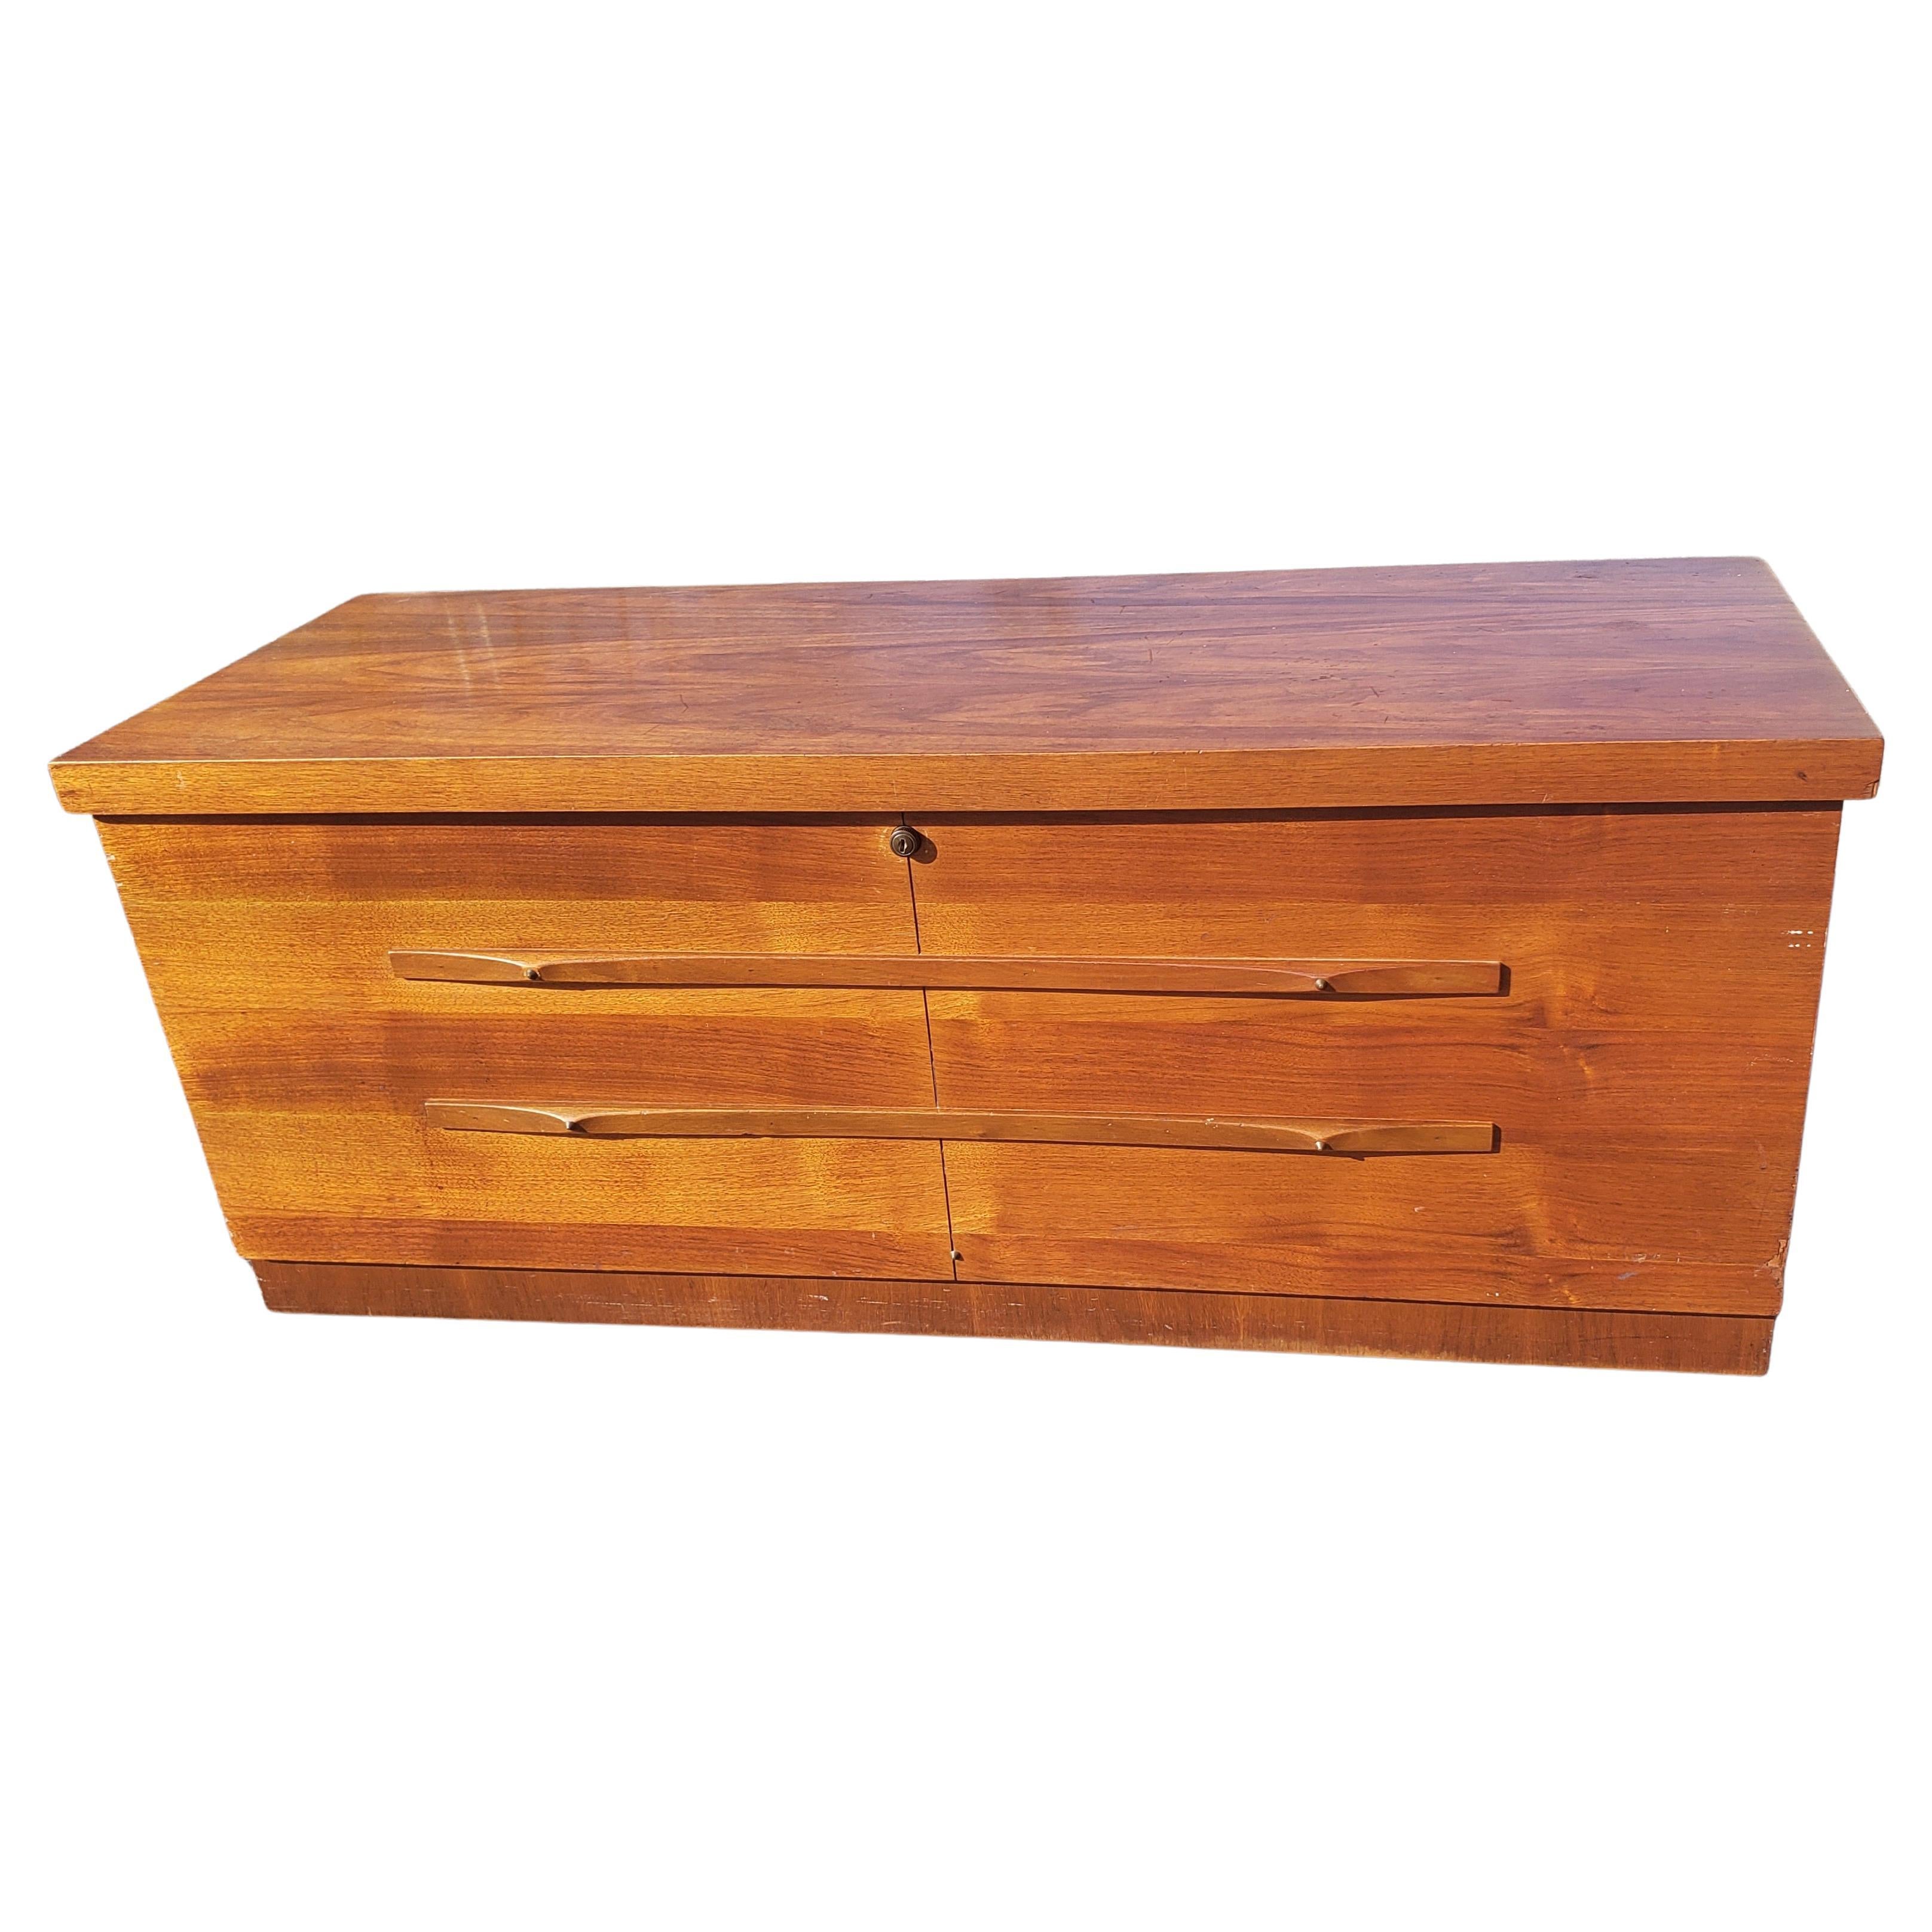 Vintage Cavalier Mahogany Cedar Blanket Chest, Circa 1940s In Good Condition For Sale In Germantown, MD